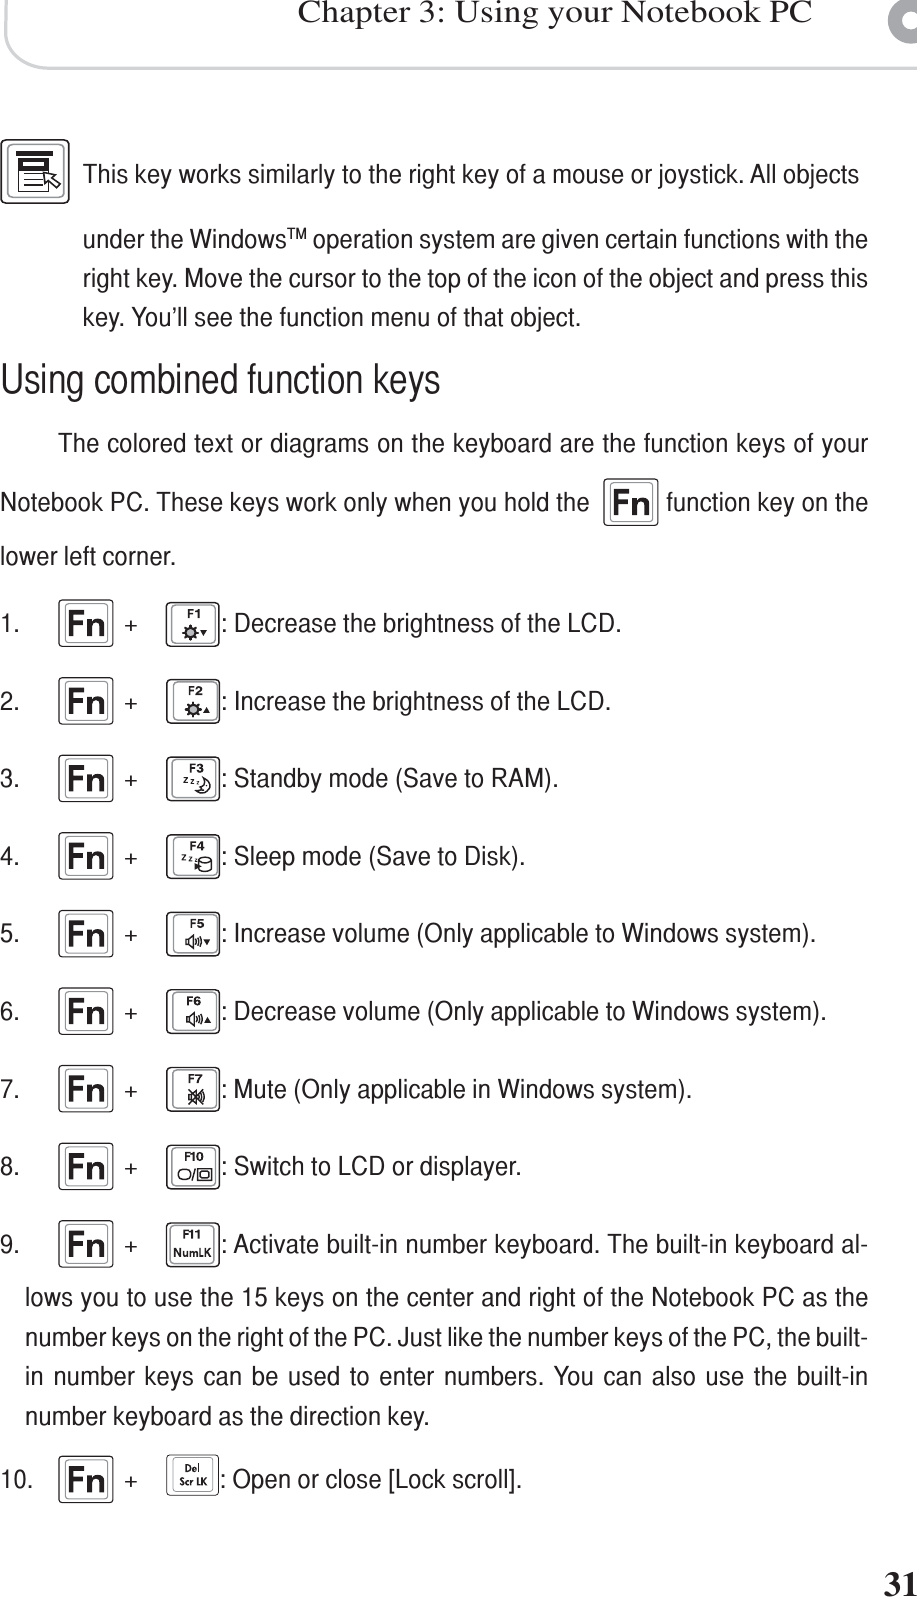 Chapter 3: Using your Notebook PC31This key works similarly to the right key of a mouse or joystick. All objectsunder the WindowsTM operation system are given certain functions with theright key. Move the cursor to the top of the icon of the object and press thiskey. You’ll see the function menu of that object.Using combined function keysThe colored text or diagrams on the keyboard are the function keys of yourNotebook PC. These keys work only when you hold the    function key on thelower left corner.1. +: Decrease the brightness of the LCD.2. +: Increase the brightness of the LCD.3. +: Standby mode (Save to RAM).4. +: Sleep mode (Save to Disk).5. +: Increase volume (Only applicable to Windows system).6. +: Decrease volume (Only applicable to Windows system).7. +: Mute (Only applicable in Windows system).8. +: Switch to LCD or displayer.9. +: Activate built-in number keyboard. The built-in keyboard al-lows you to use the 15 keys on the center and right of the Notebook PC as thenumber keys on the right of the PC. Just like the number keys of the PC, the built-in number keys can be used to enter numbers. You can also use the built-innumber keyboard as the direction key.10. +: Open or close [Lock scroll].